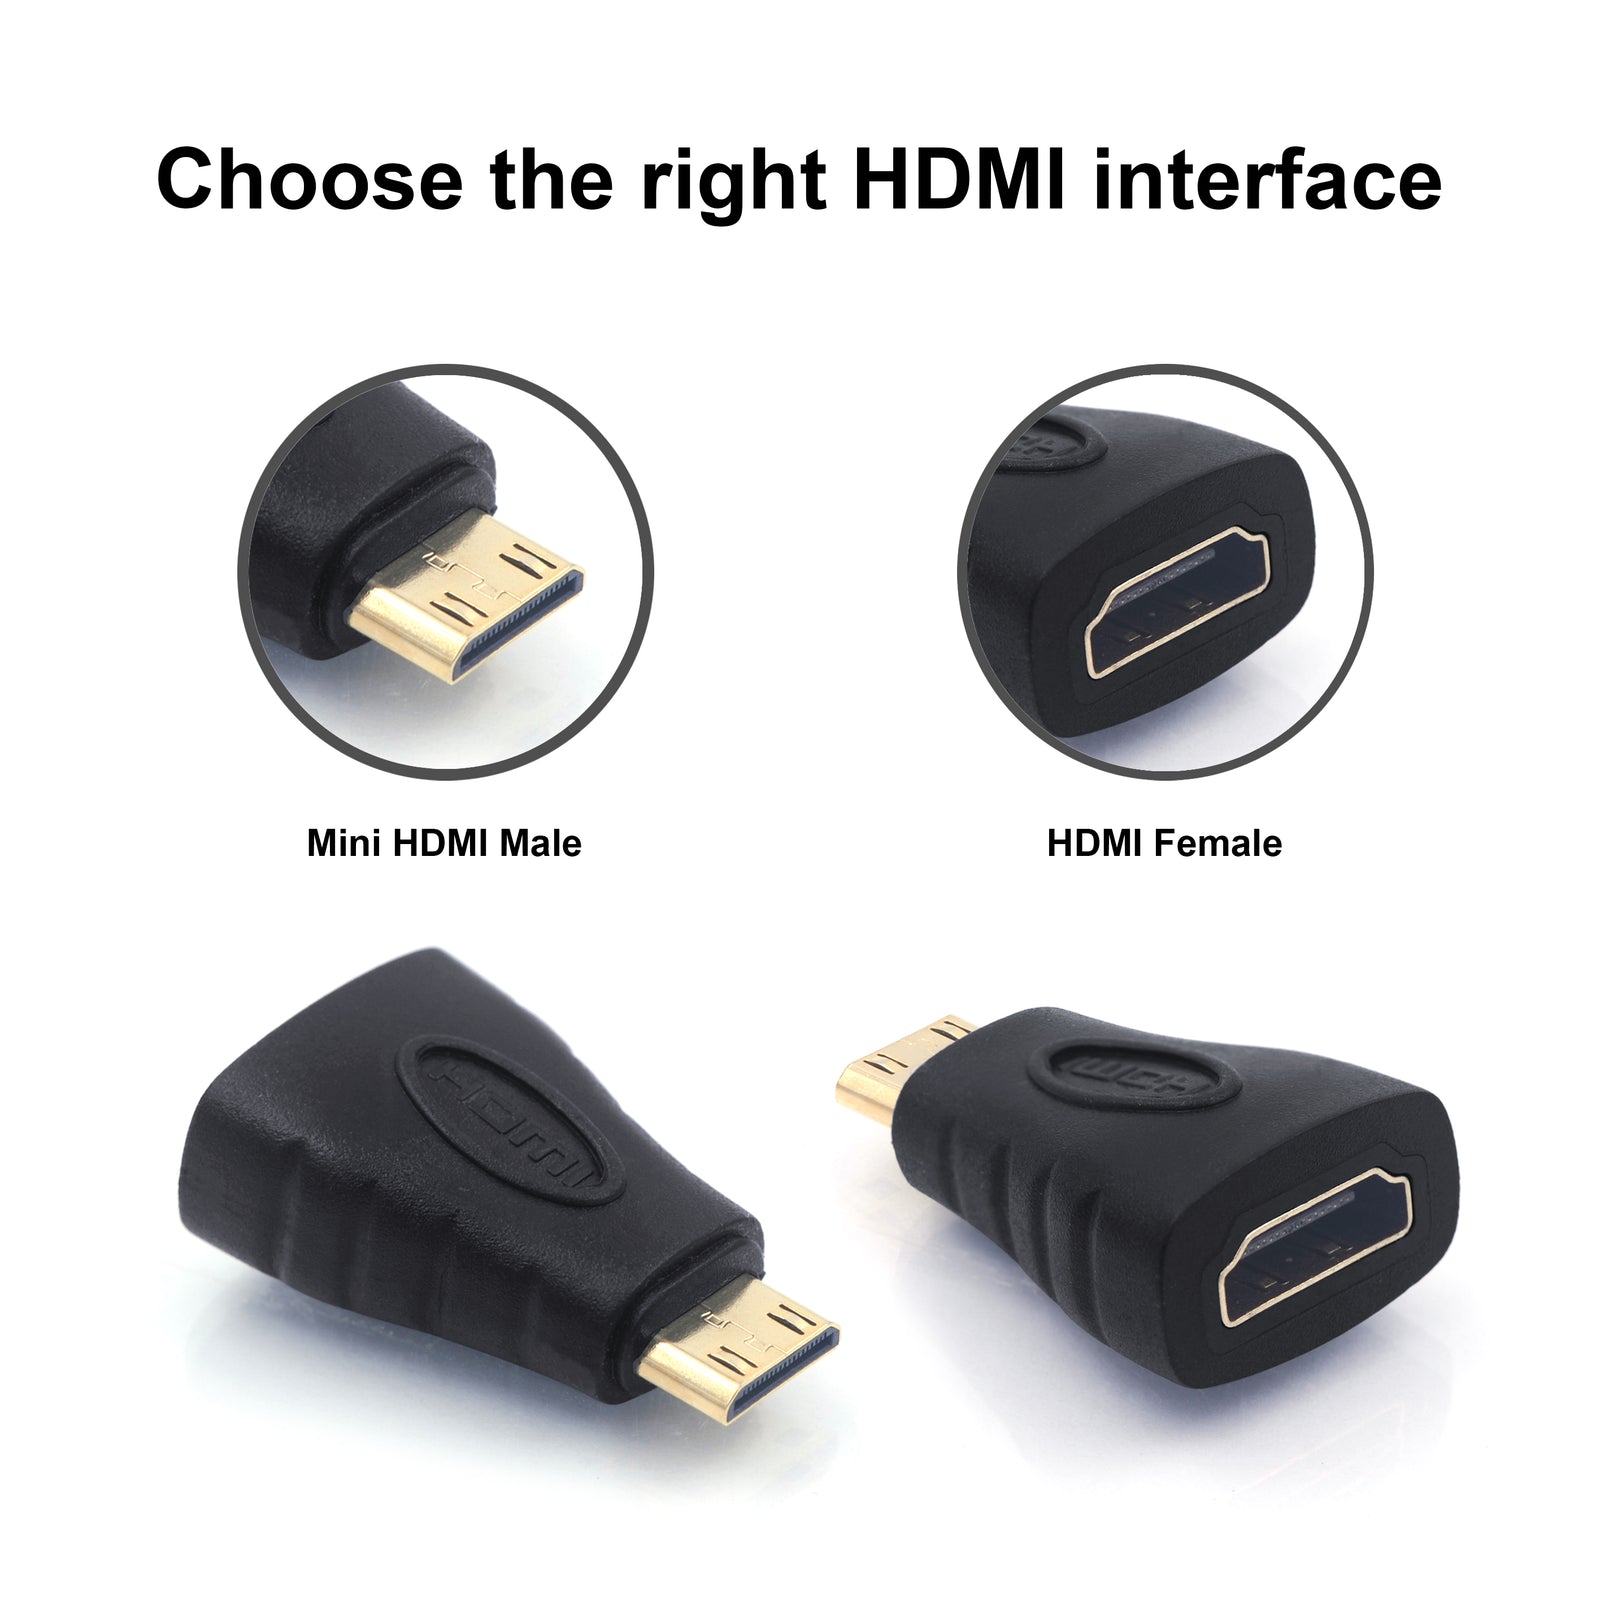 VCE Mini HDMI to HDMI Adapter 2-Pack, 4K HDMI Female to Mini HDMI Male  Adapter, Gold Plated Connector Compatible with Raspberry Pi, Camera,  Camcorder